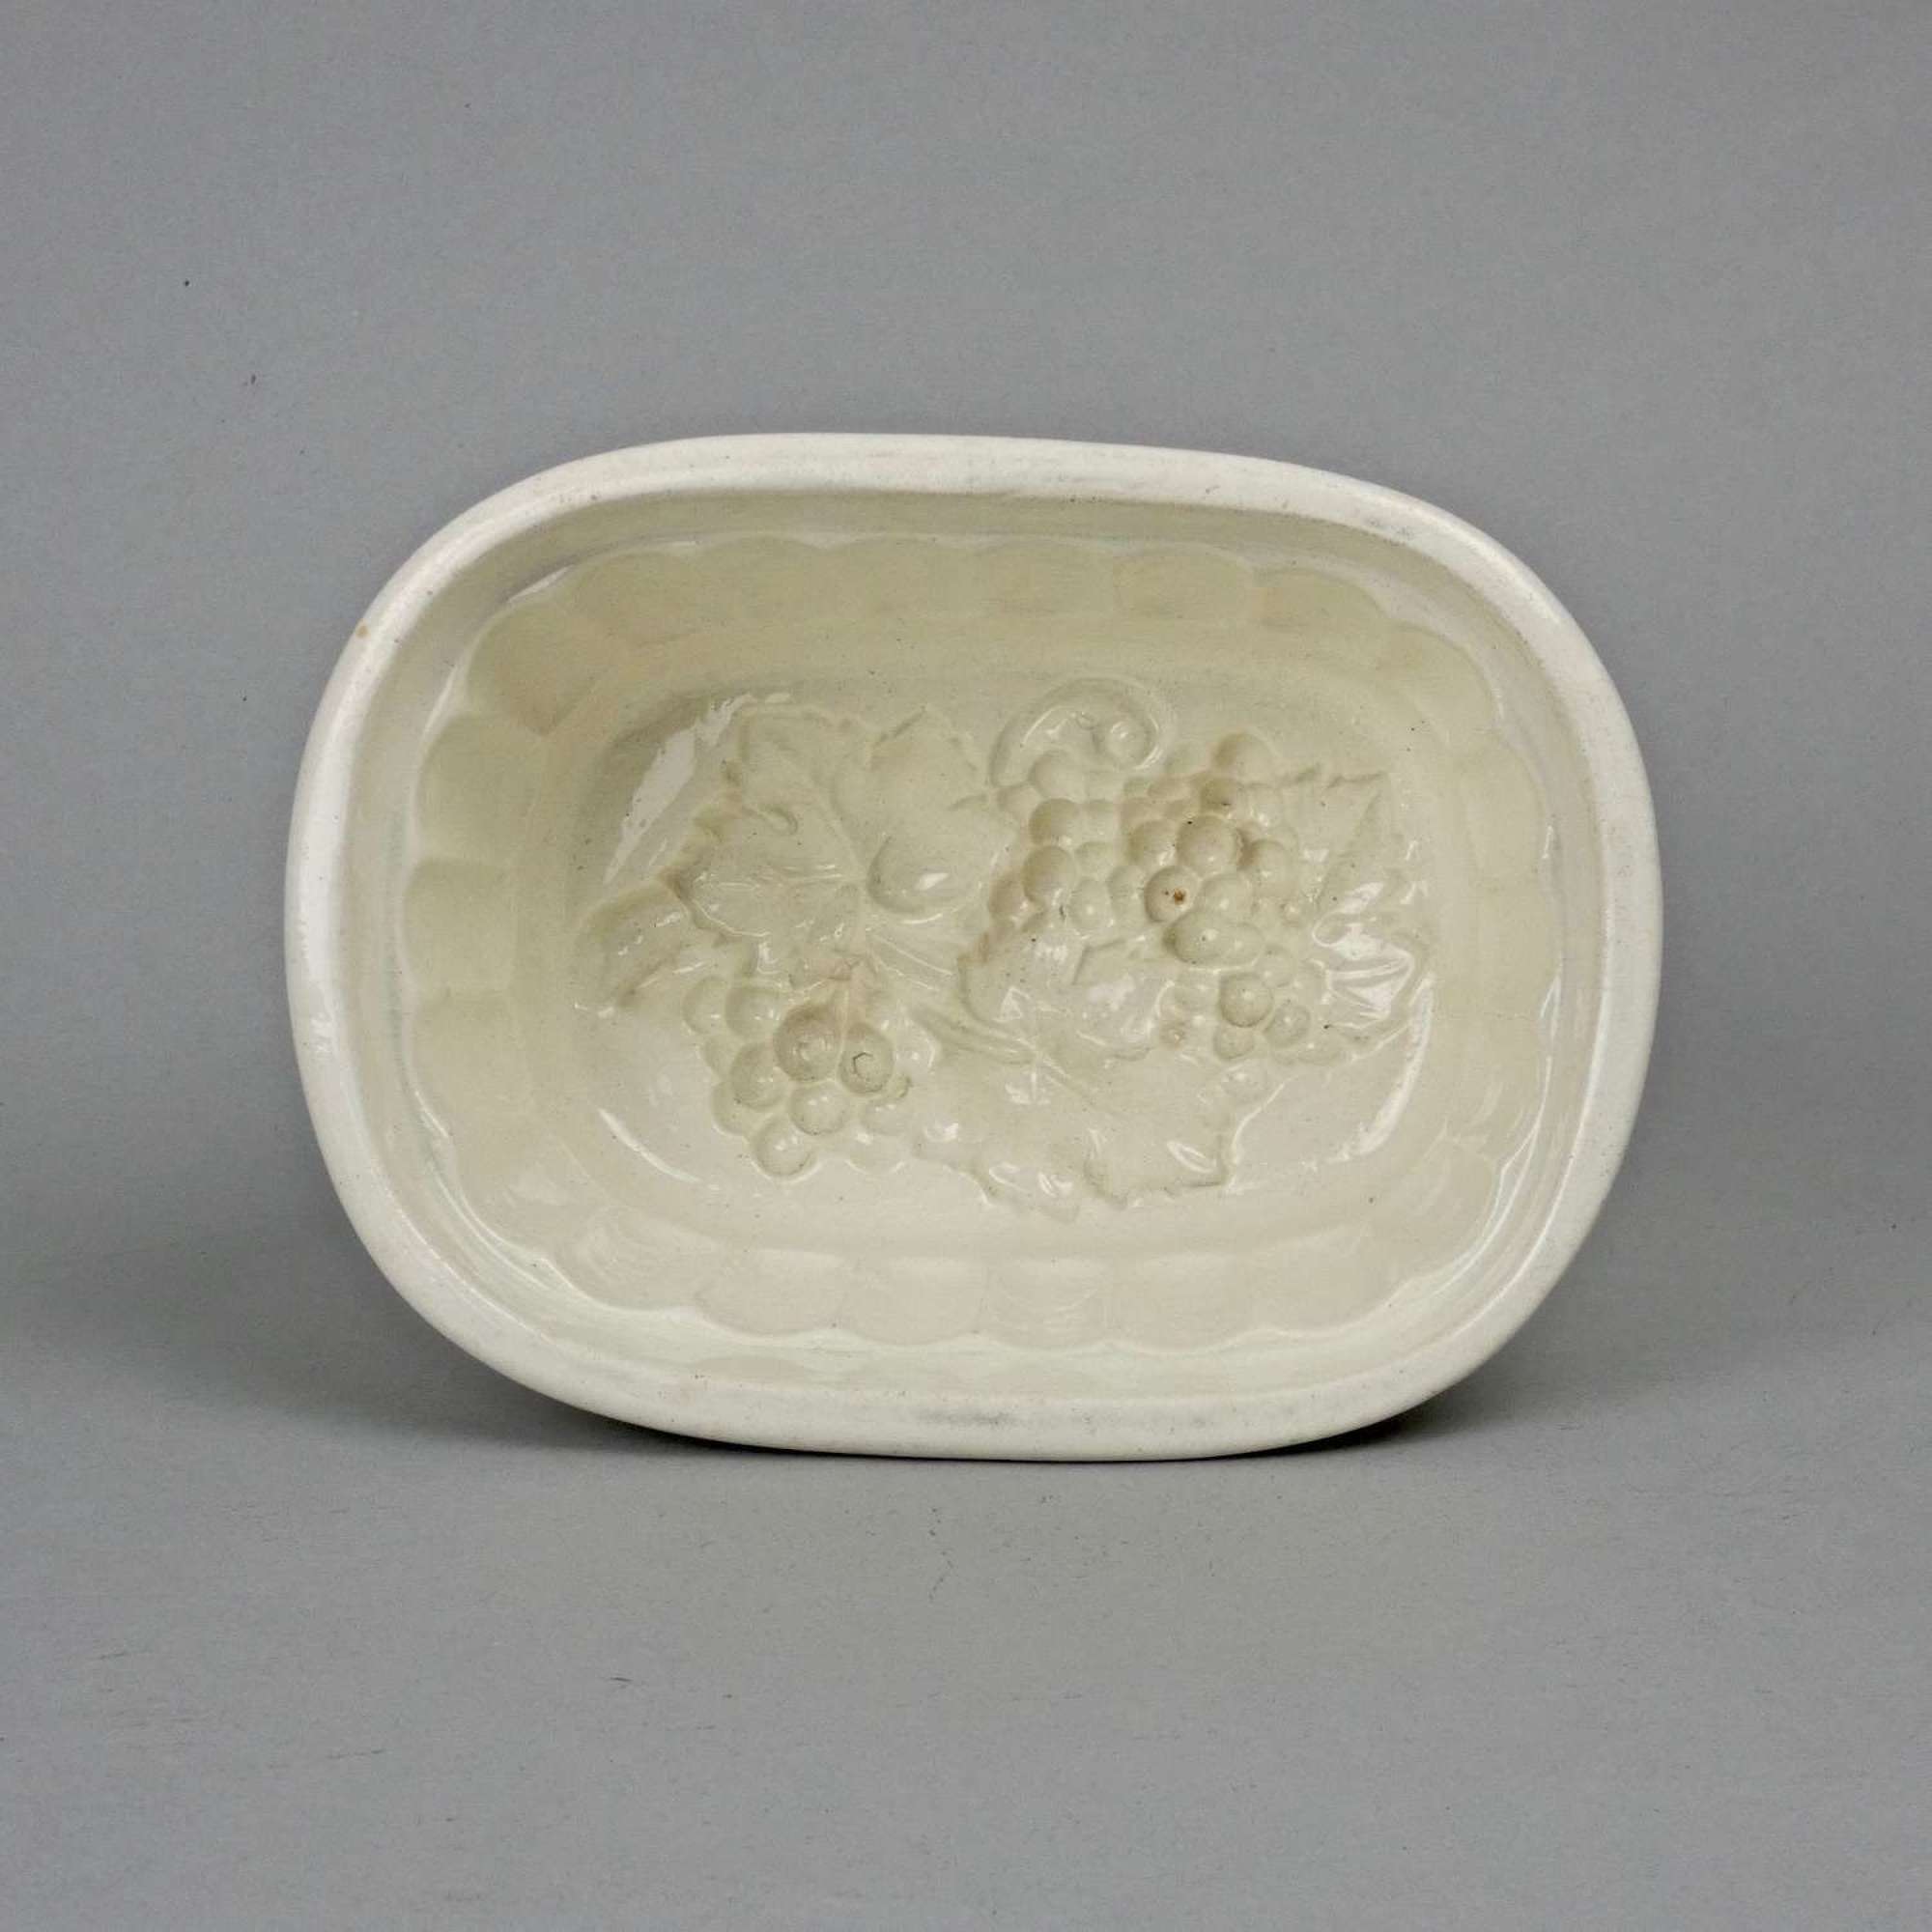 Wedgwood jelly mould